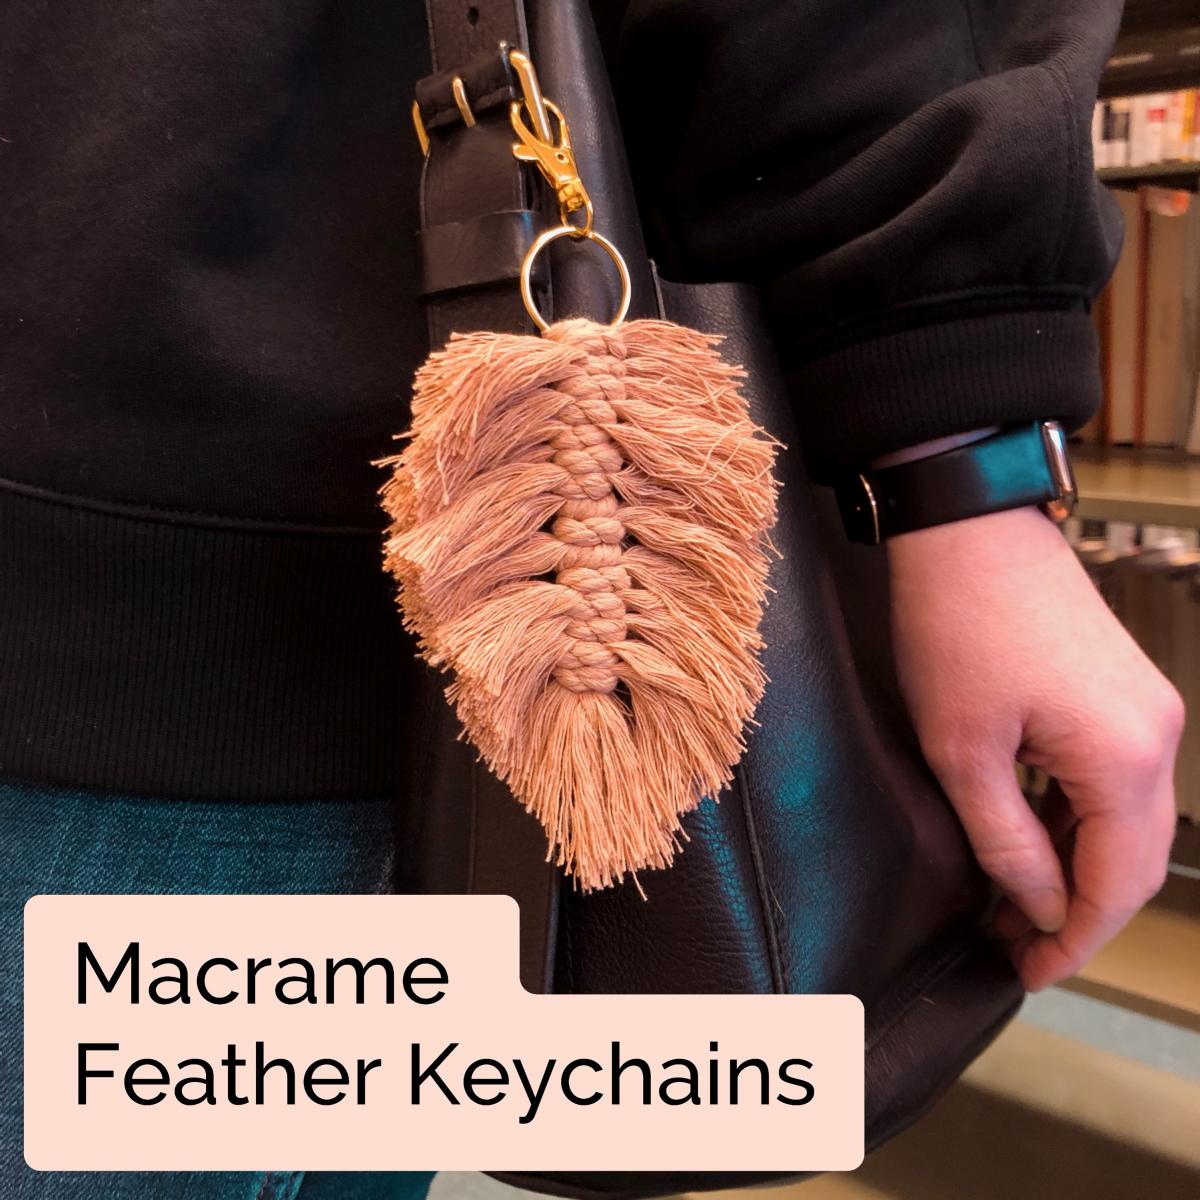 Craft Takeout Macrame Feather Keychains